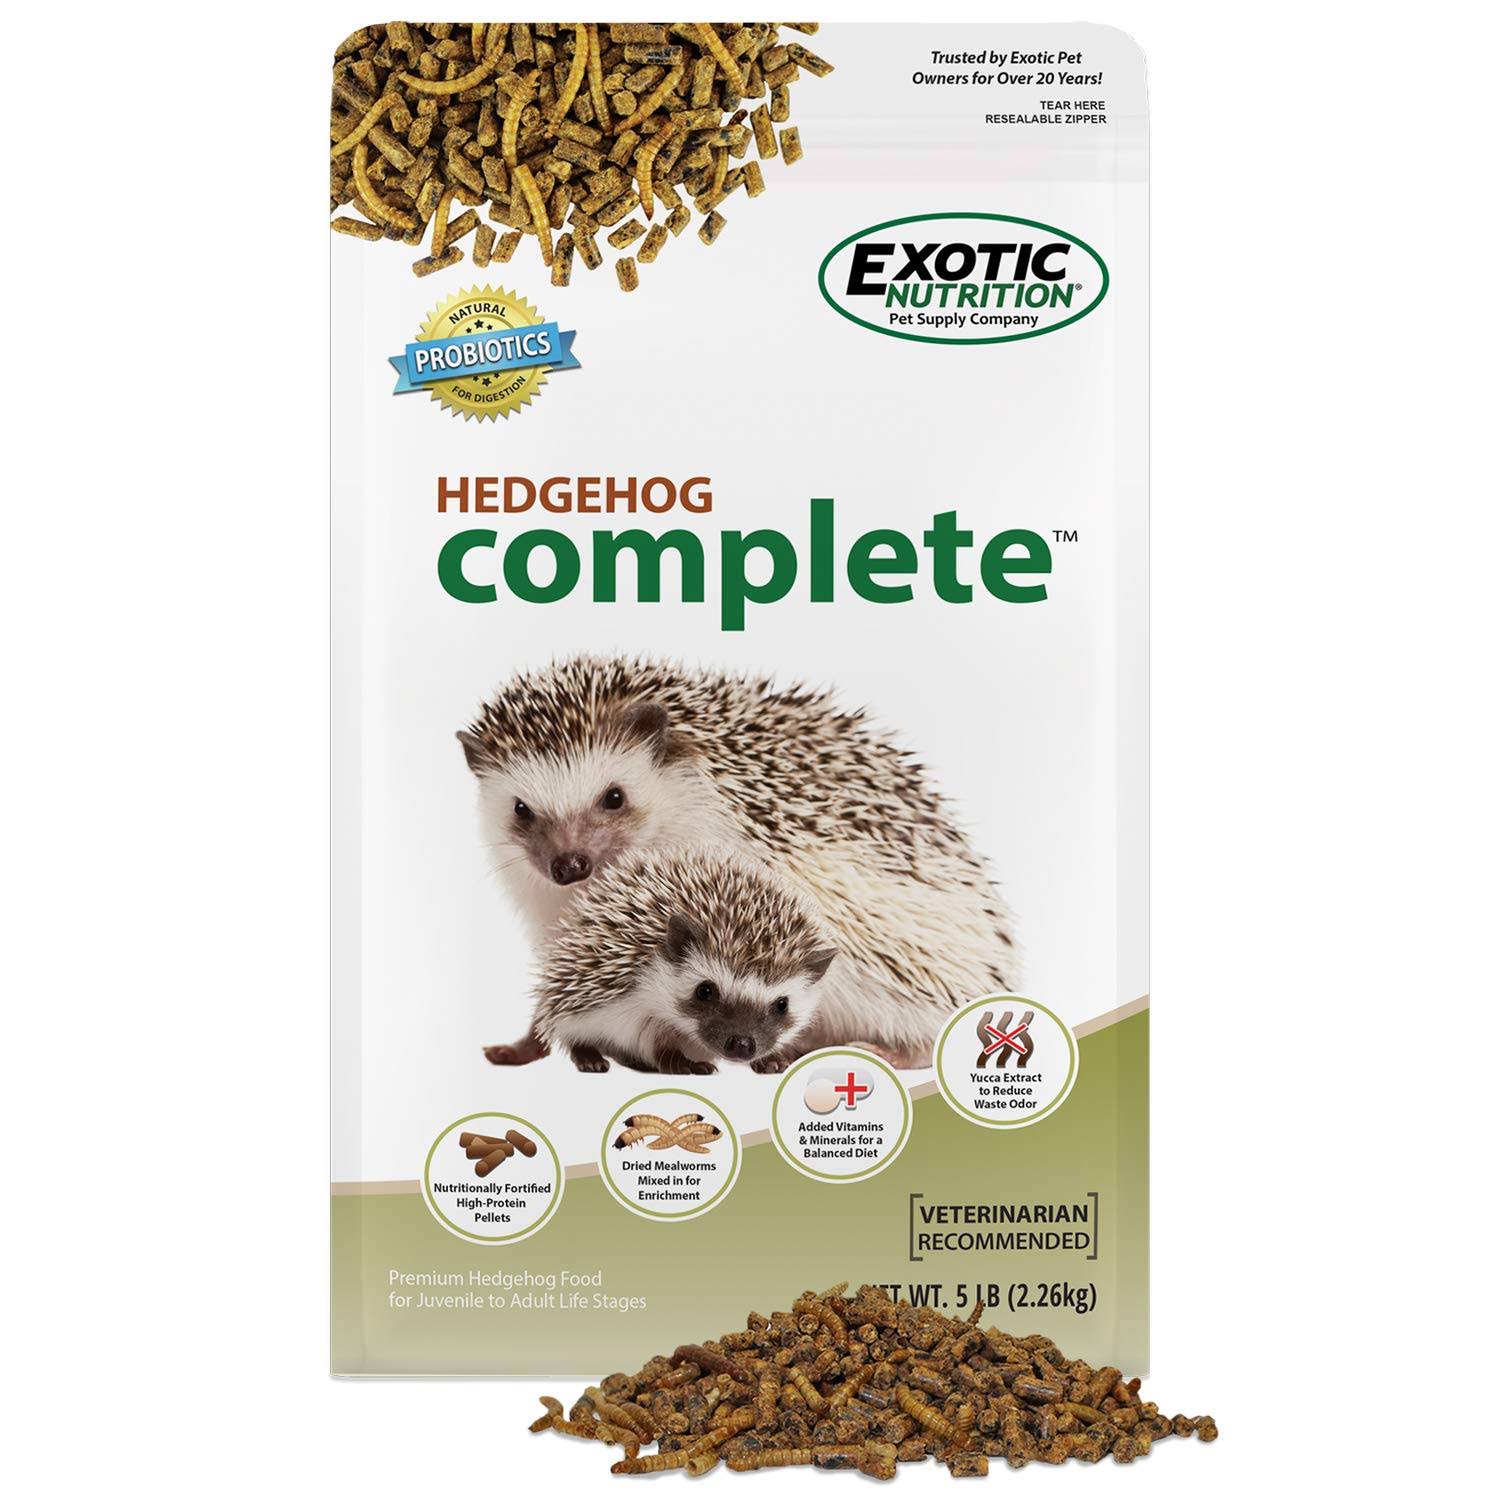 Exotic Nutrition Hedgehog Complete - Nutritionally Complete Natural Healthy High Protein Pellets & Dried Mealworms - Food for Pet Hedgehogs